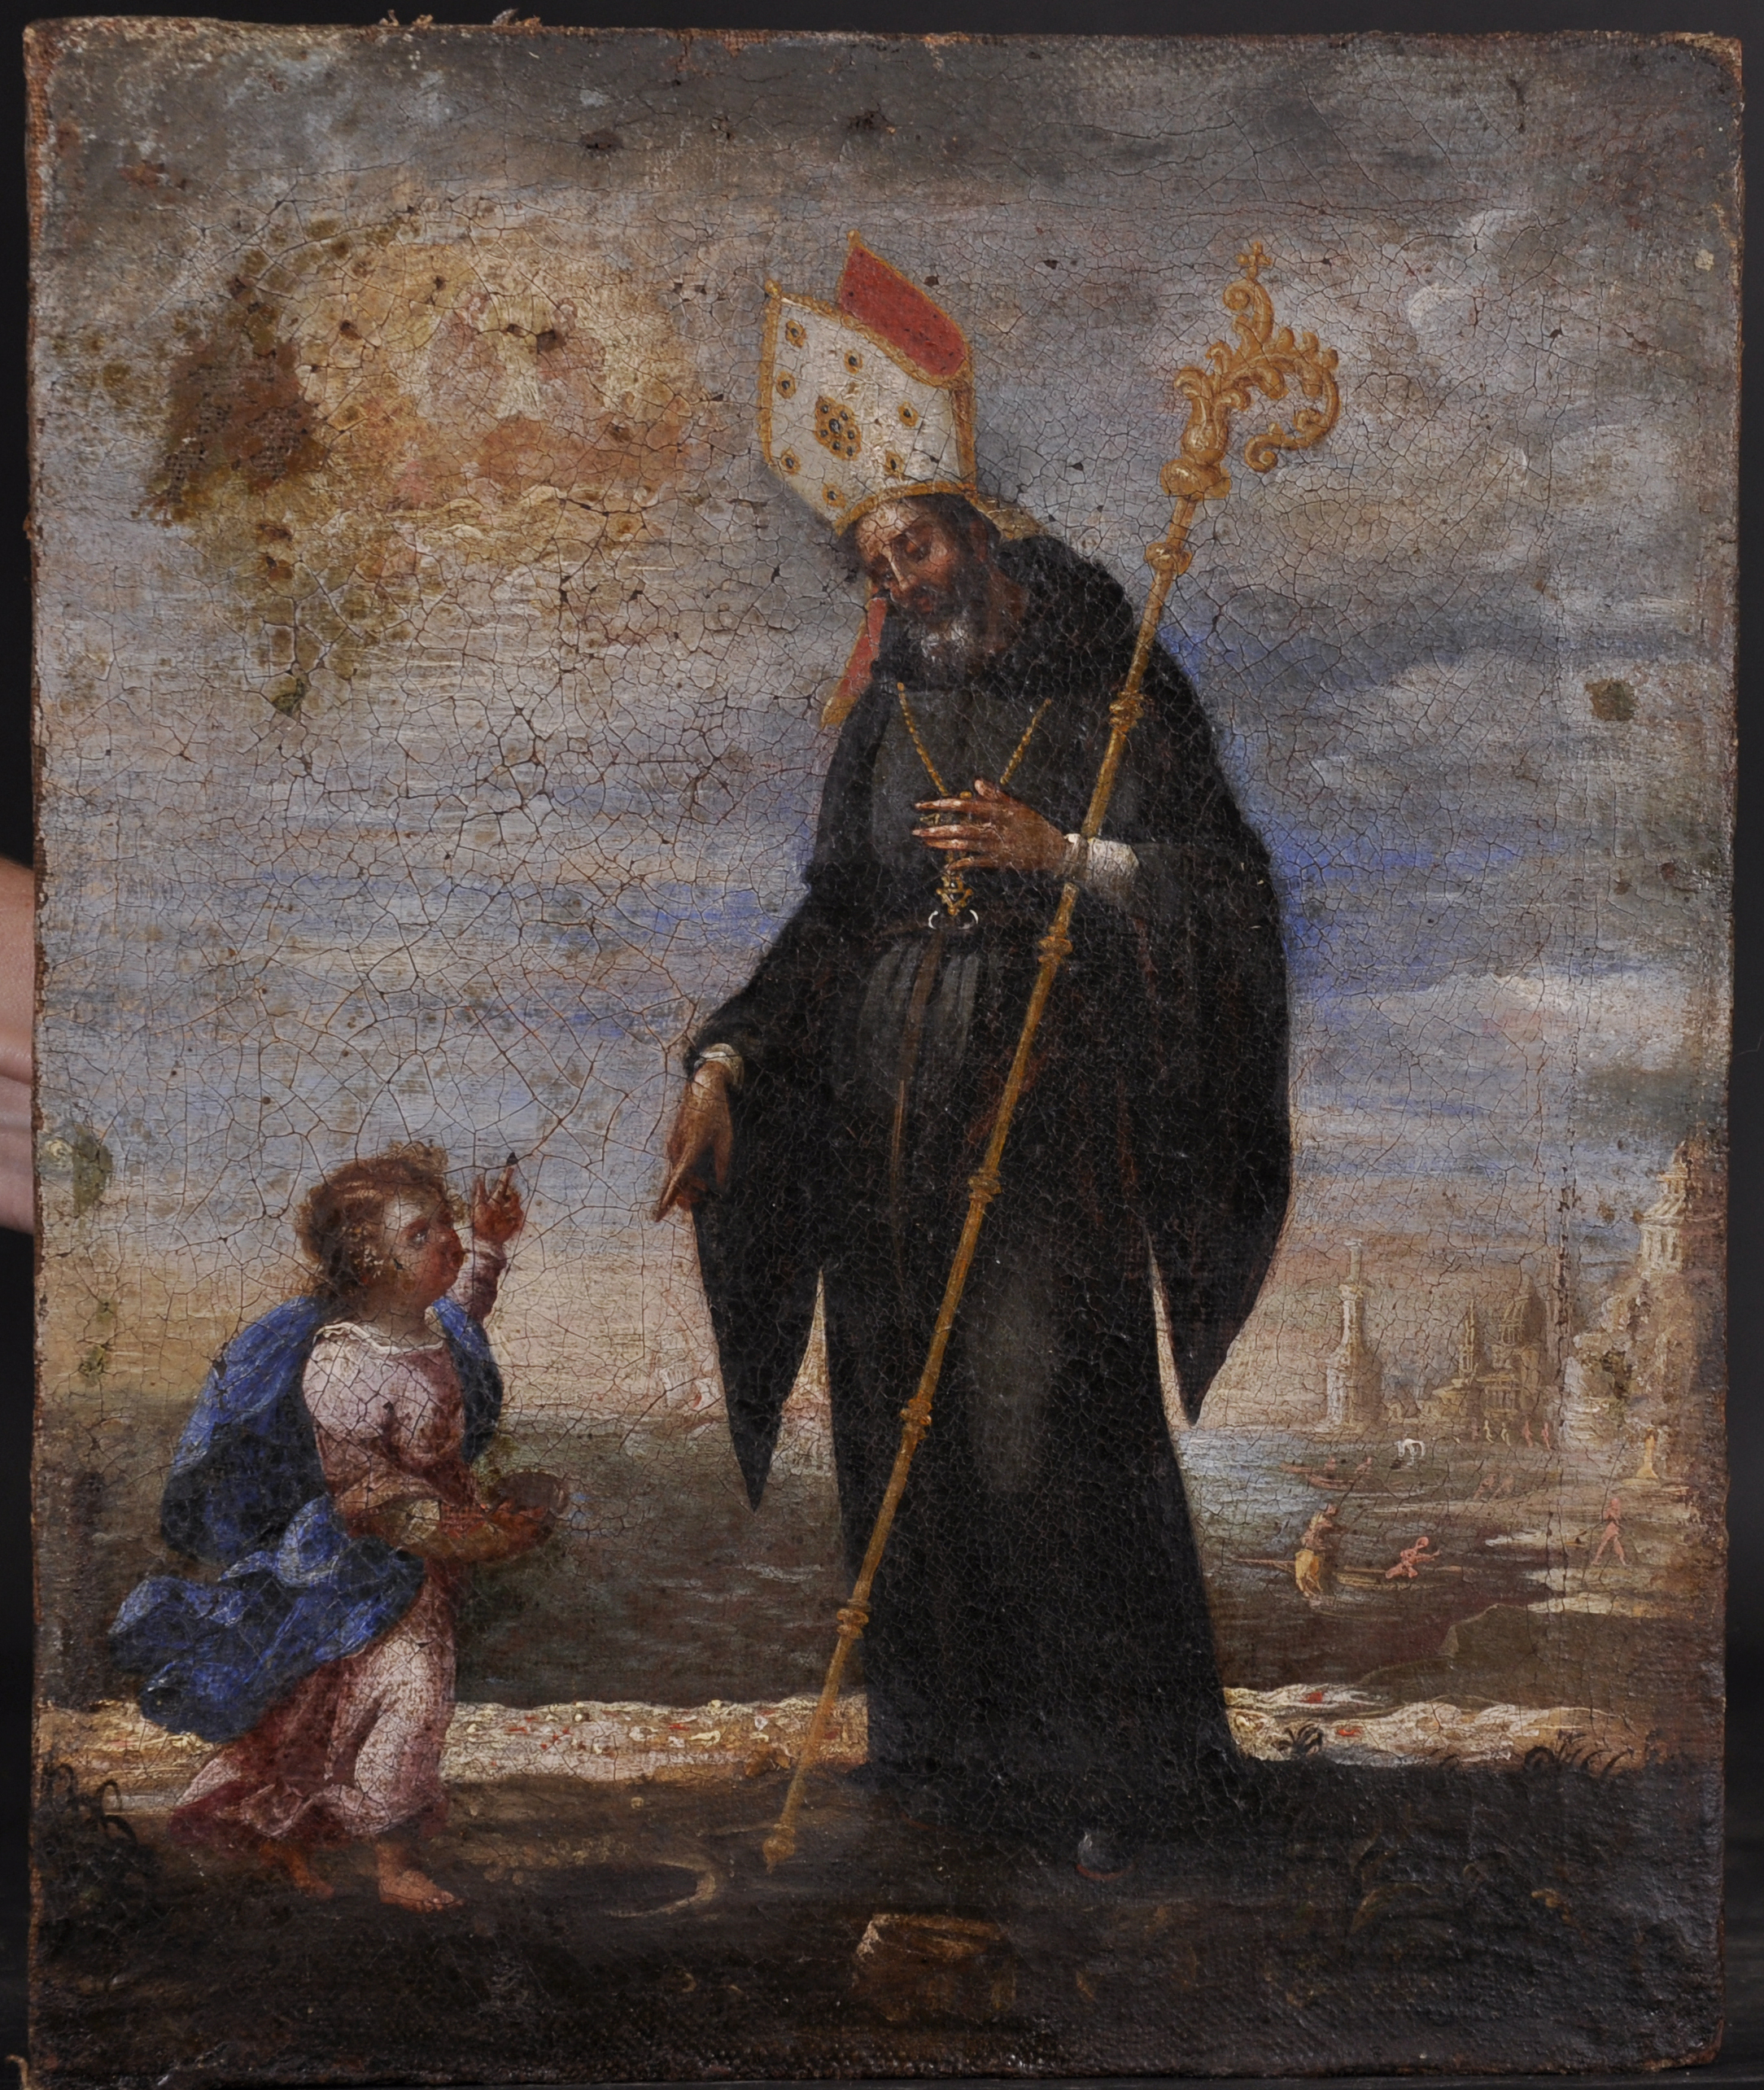 17th Century Italian School. A Priest with a Small Child, Oil on Canvas, Unframed, 11.75” x 9.75” ( - Image 2 of 3